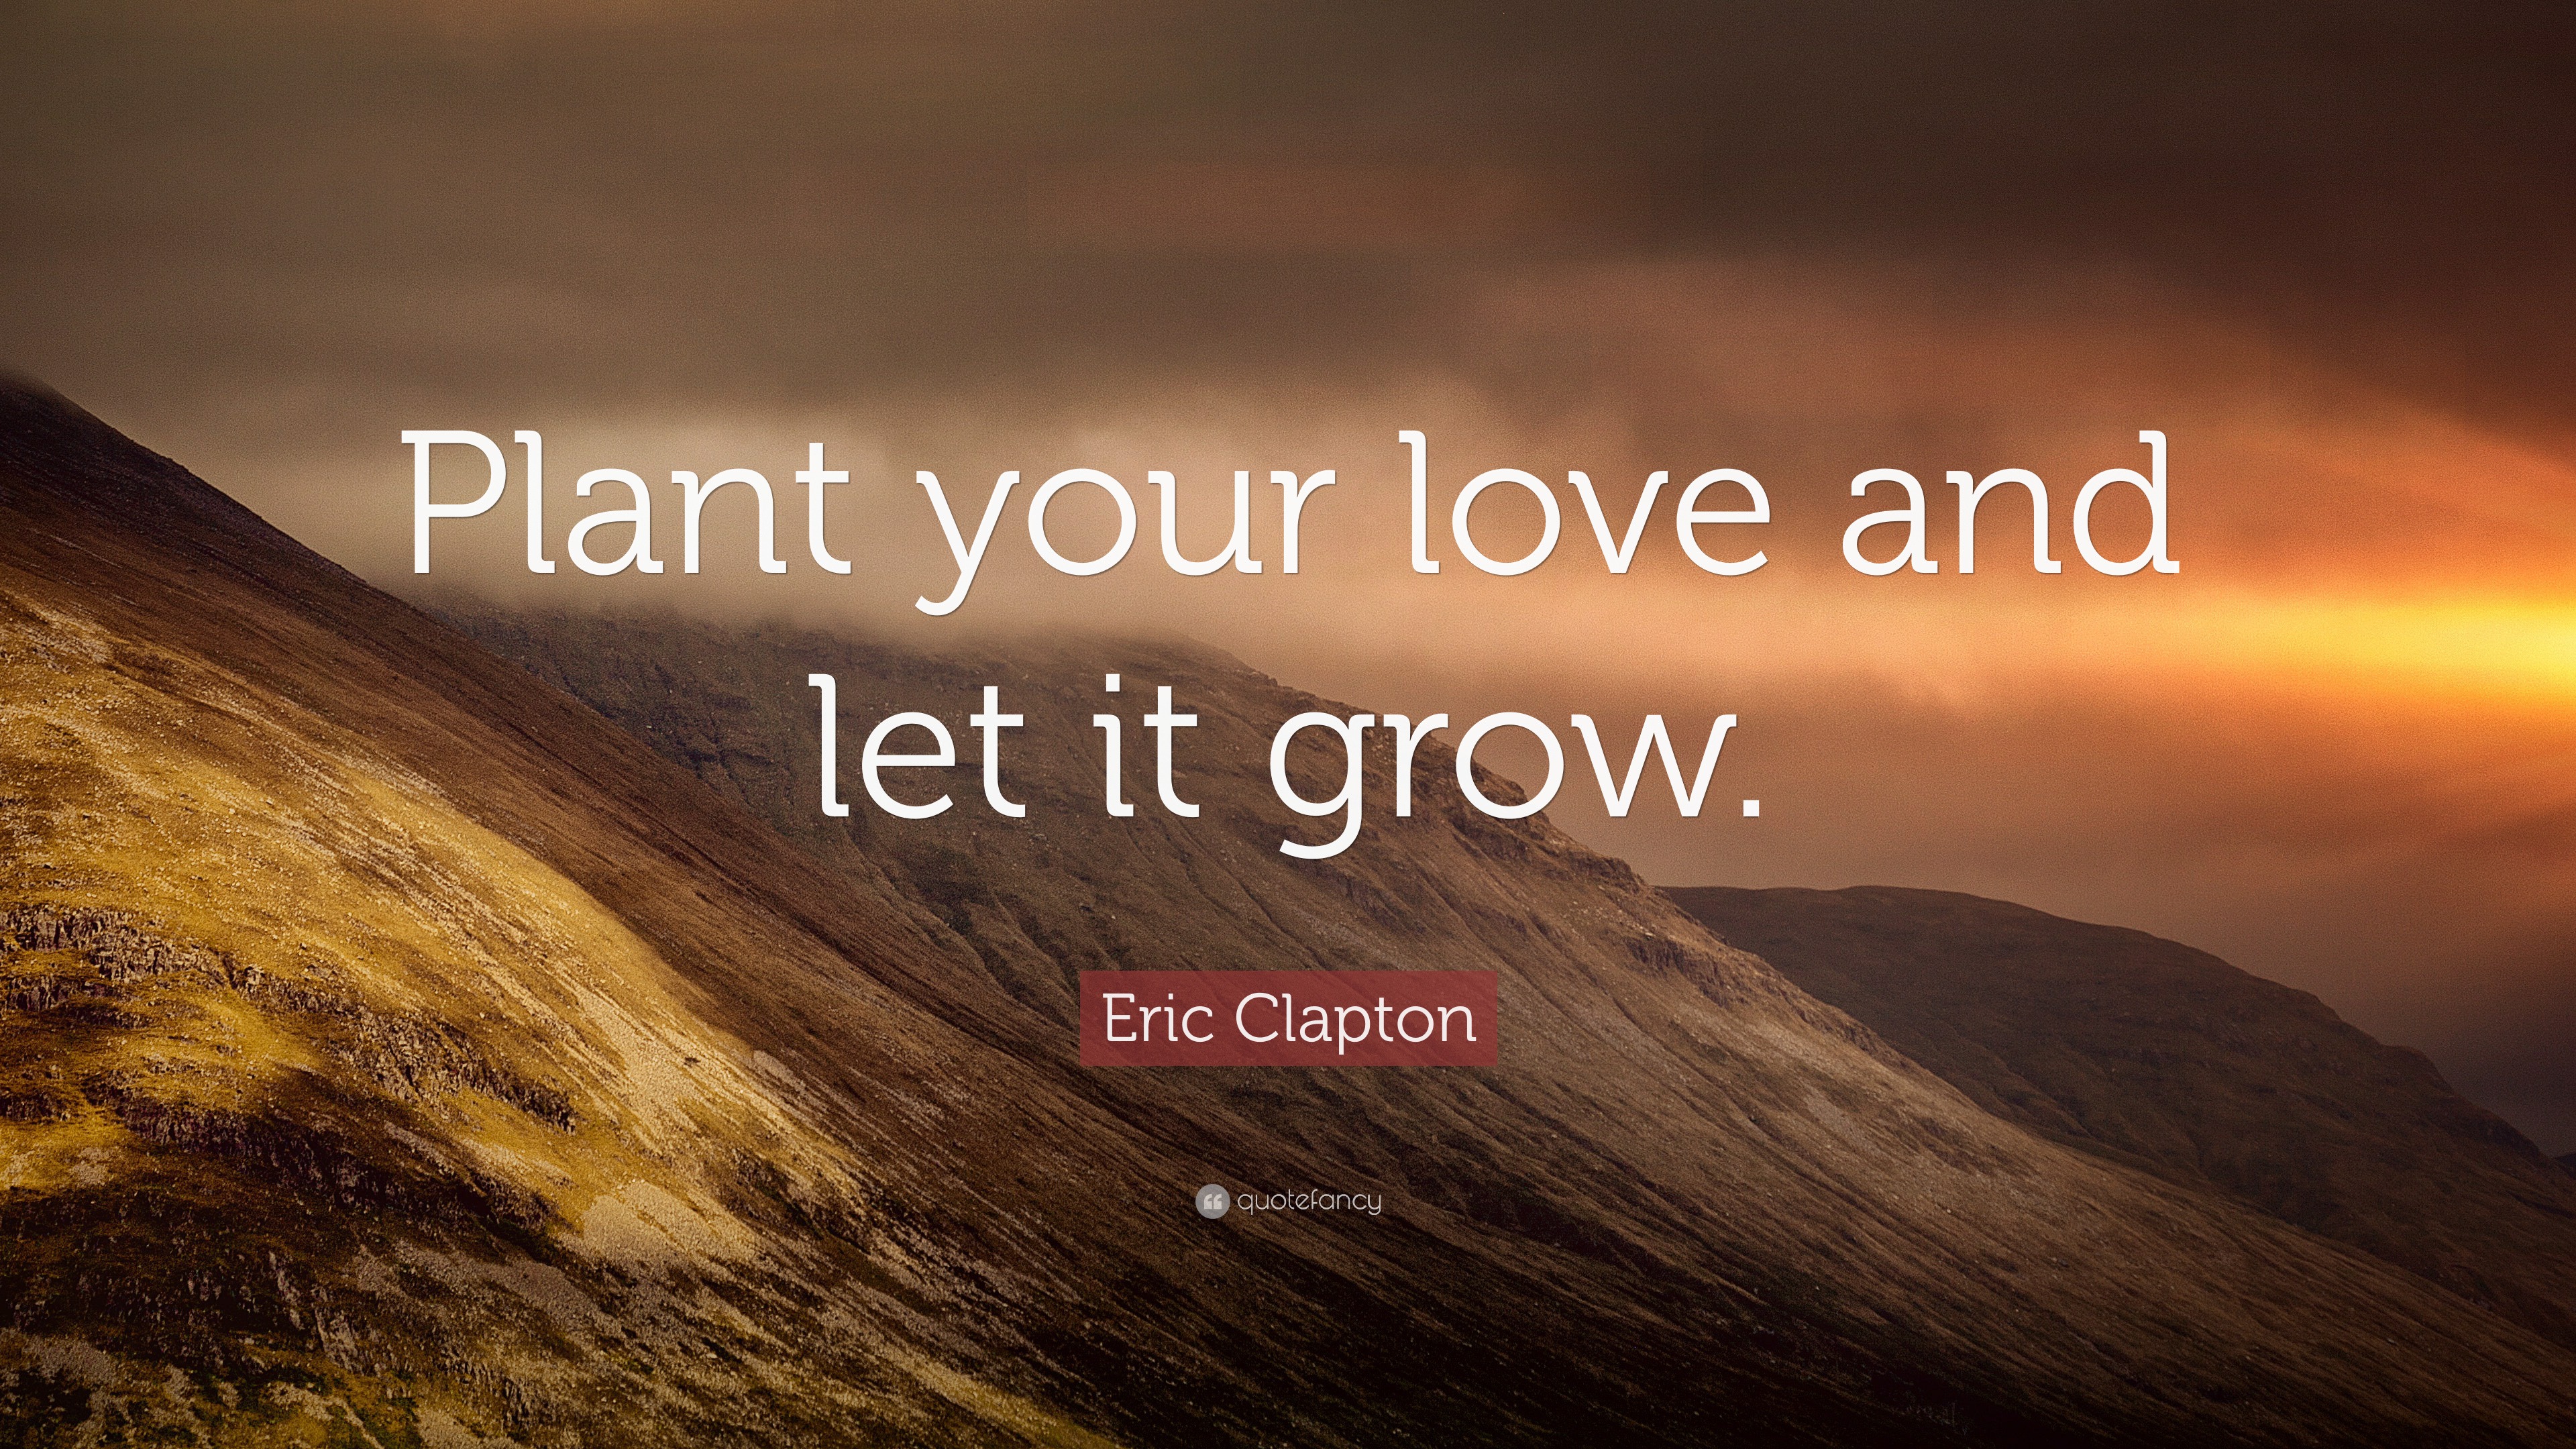 Let Your Love Grow